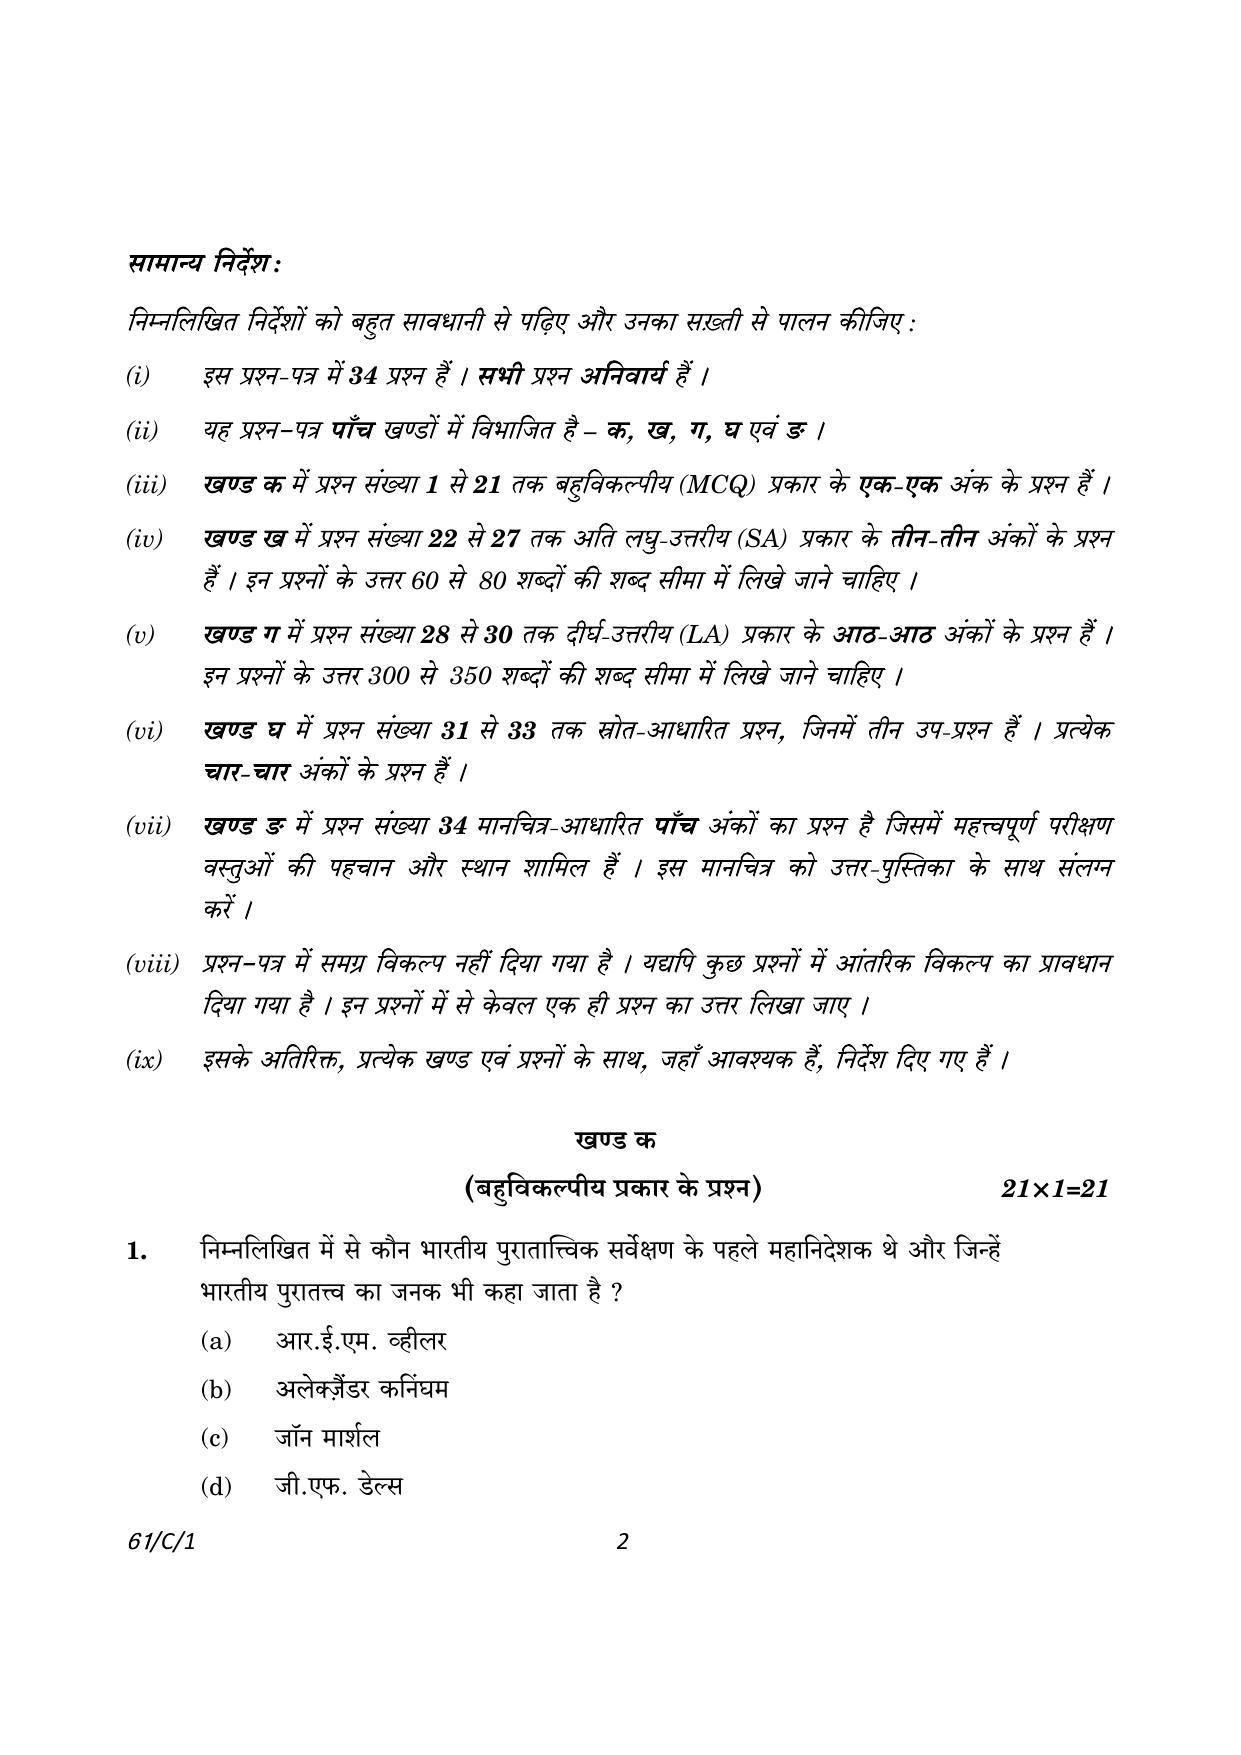 CBSE Class 12 61-1 History 2023 (Compartment) Question Paper - Page 2